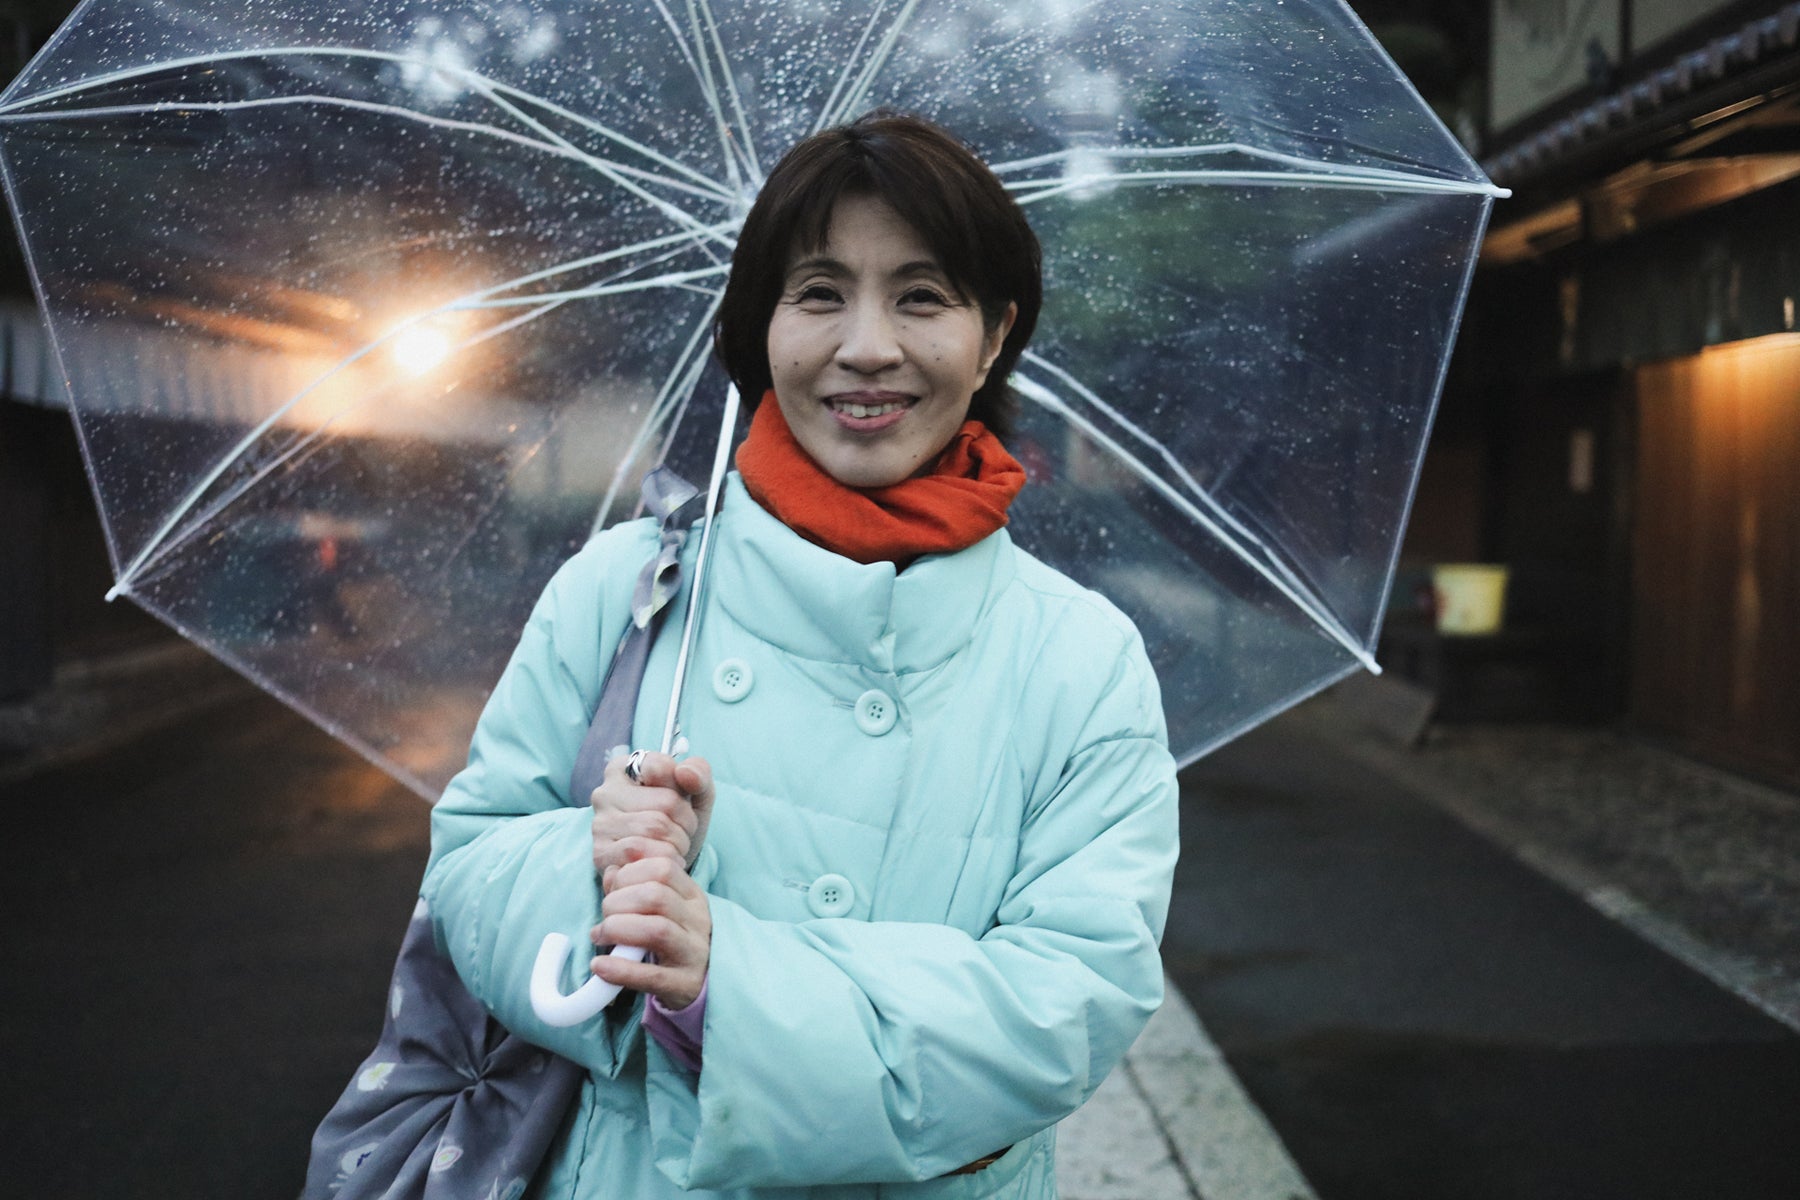 Etsuko Yamada, owner of Musubi Furoshiki, poses in a pale blue jacket and red scarf with a transparent umbrella on the rainy streets of Kyoto. 